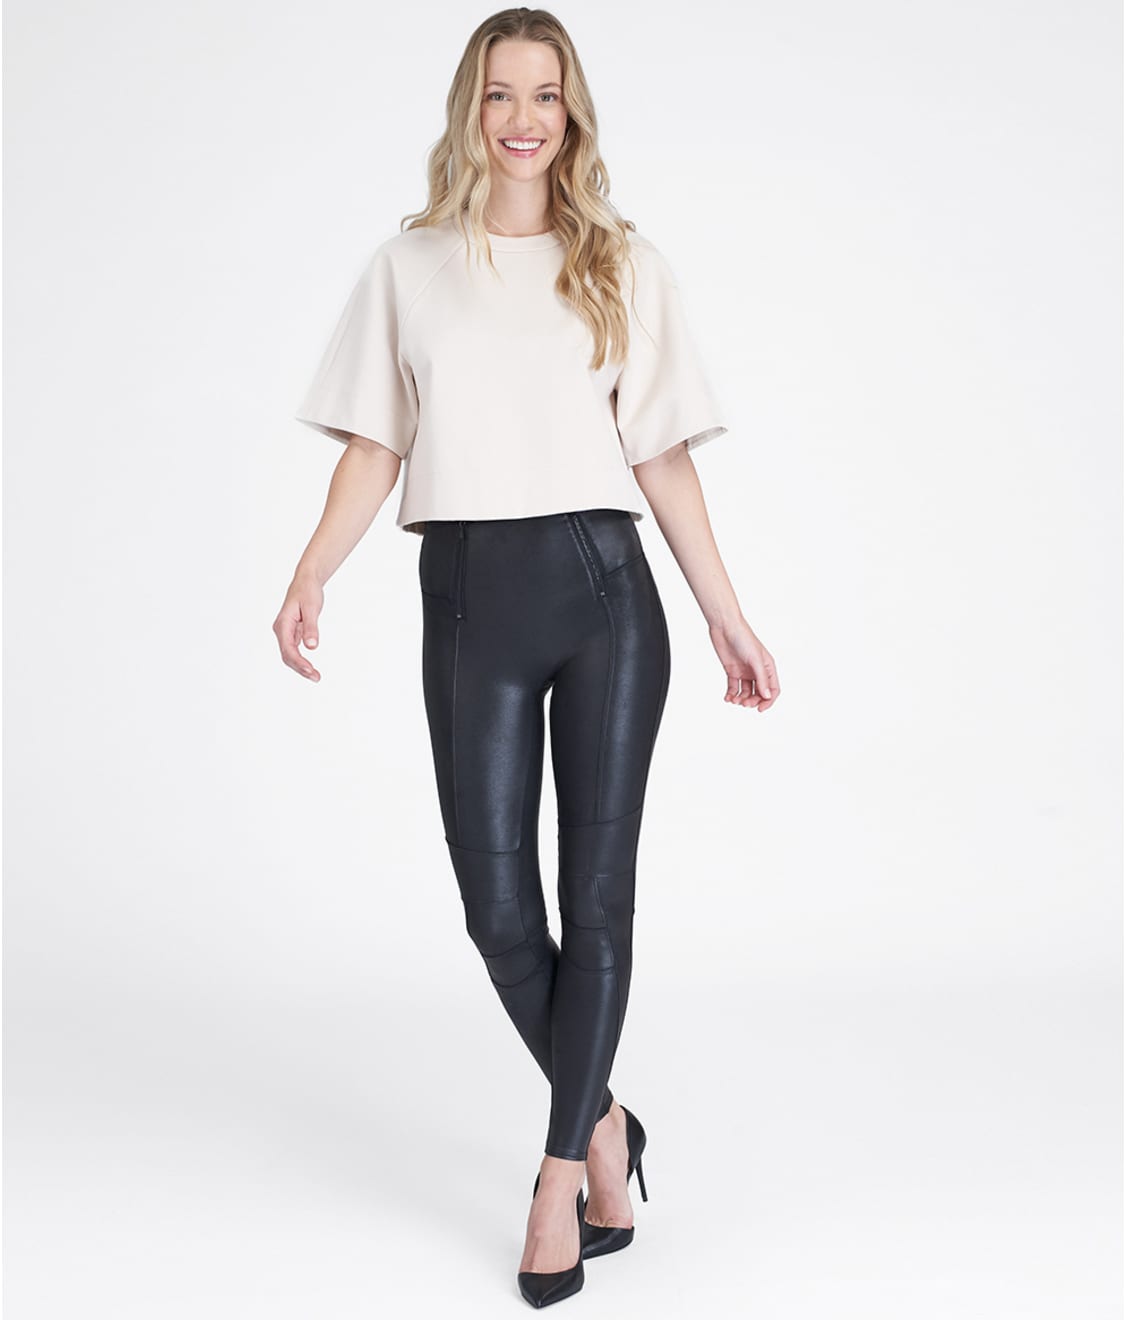 NEW COLLECTION Black Extra Long Leggings / Faux Leather Front